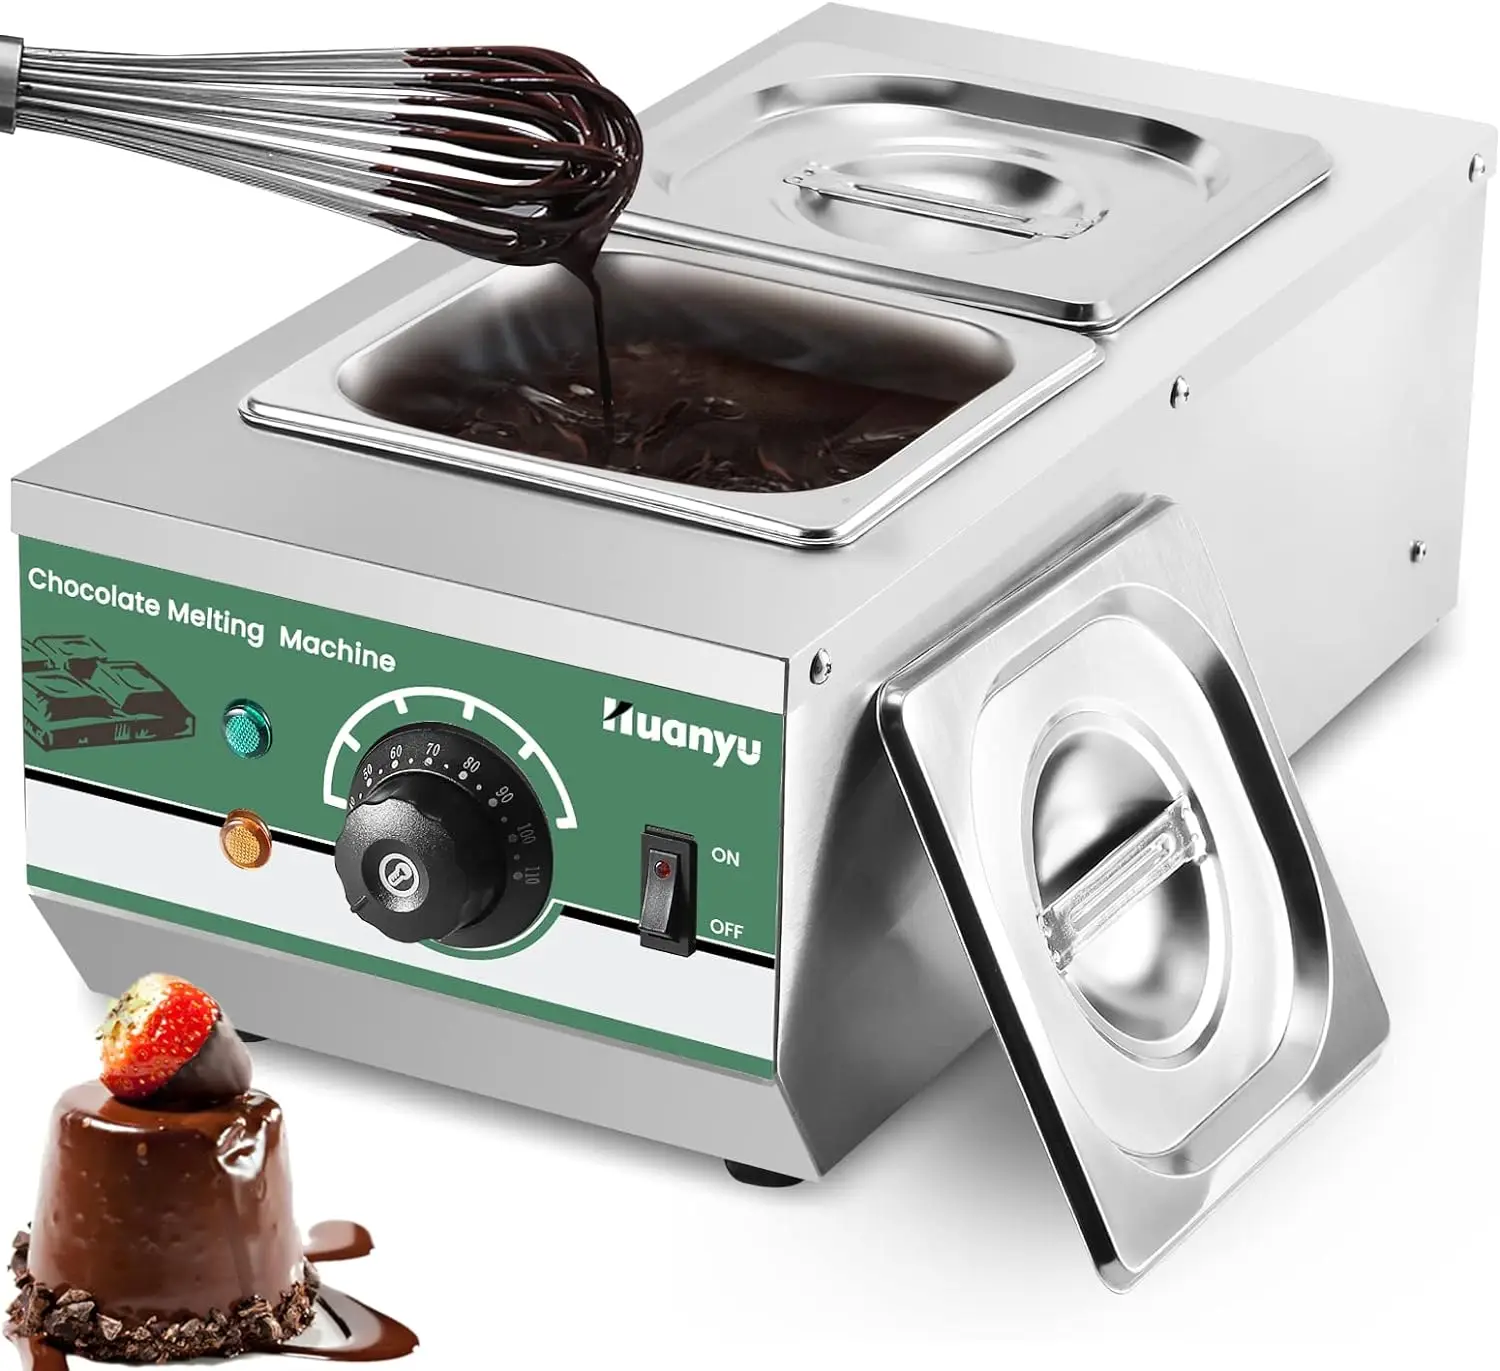 

Tempering Machine 86~176℉ Commercial Melting 2-Pot 9LBs Stainless Steel Food Warmer Professional Heated Chocolate Melter with